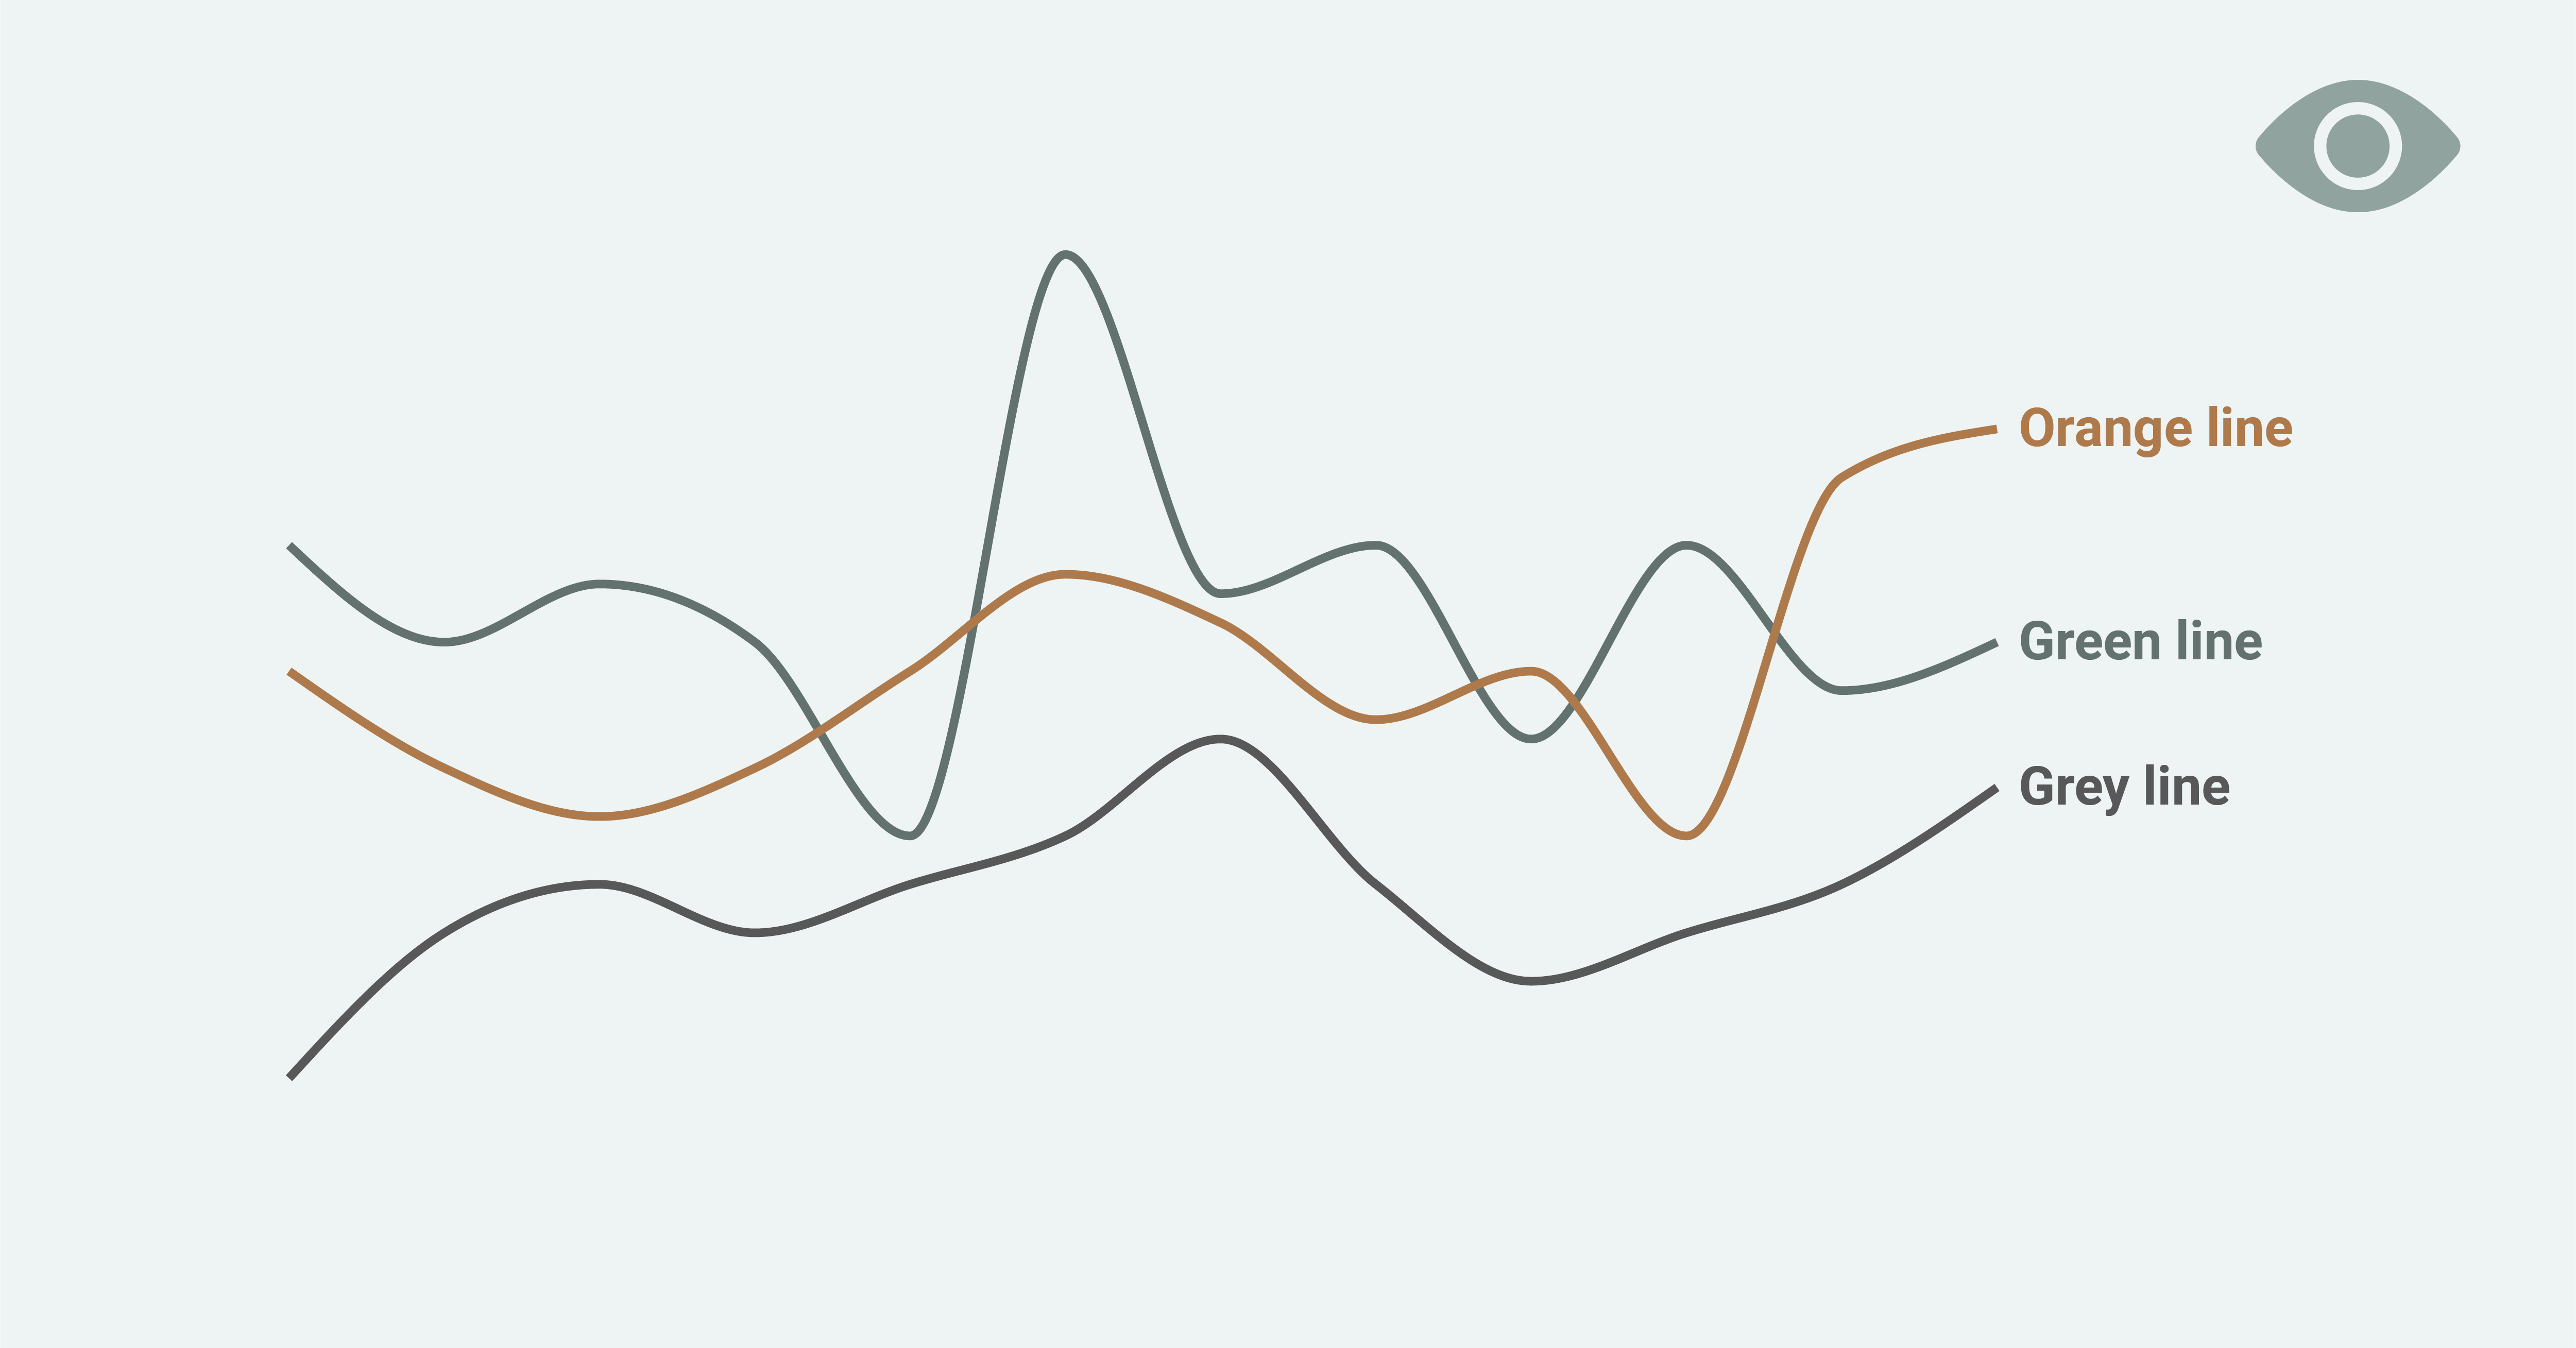 The illustration shows three lines of a line chart, each curved and in different color. One line is orange, second line is green, the last one is grey. All three lines have direct labels next to them.